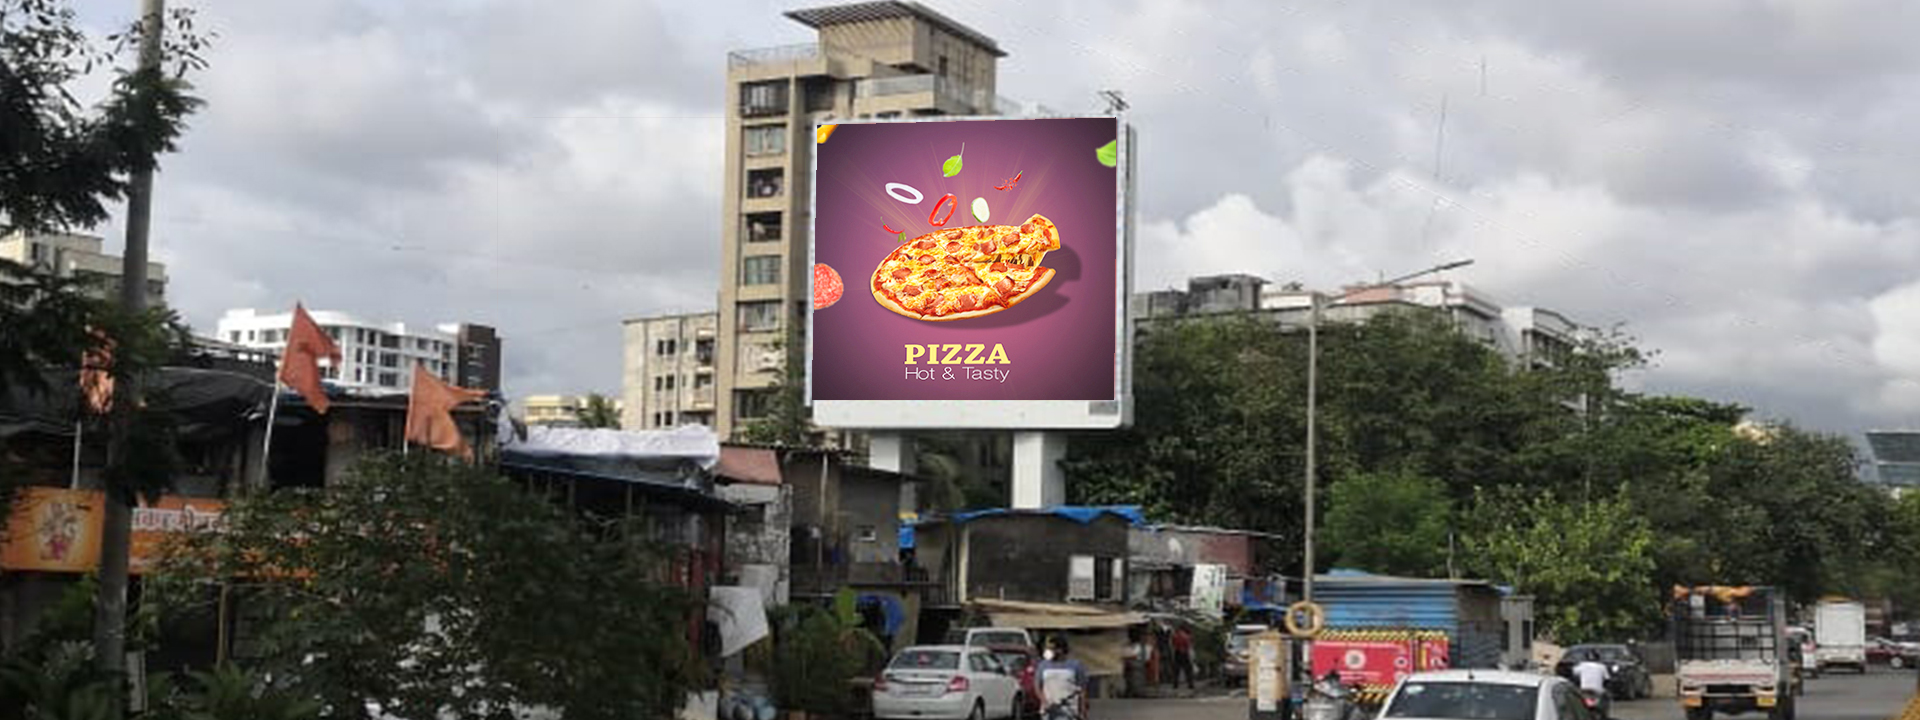 Outdoor Advertising Displays for Options 